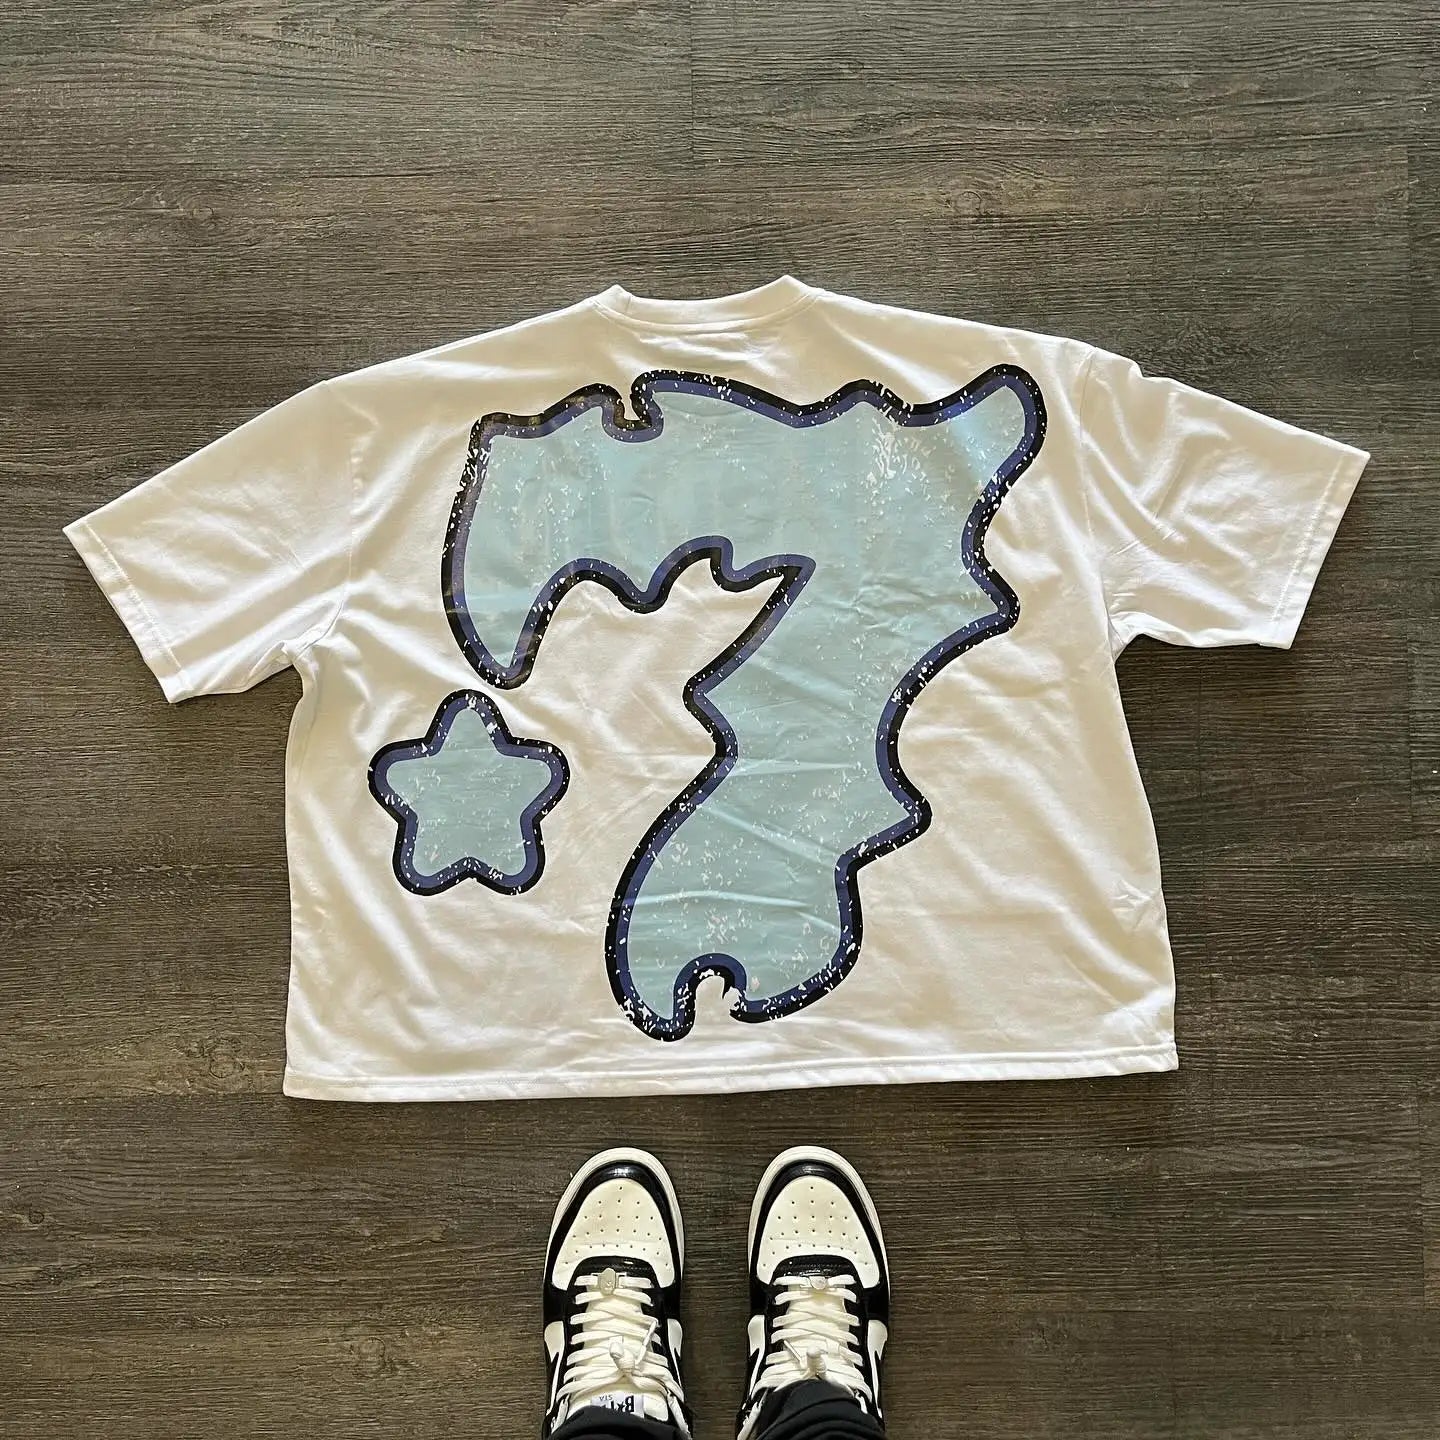 An American 777 graphic t shirts print oversized gothic Smart Casual streetwear graphic y2k tops goth men clothes by Maramalive™ featuring a large, abstract blue graphic design lays flat on a wooden floor, with a pair of sneakers visible at the bottom edge of the image, exuding Harajuku streetwear vibes.